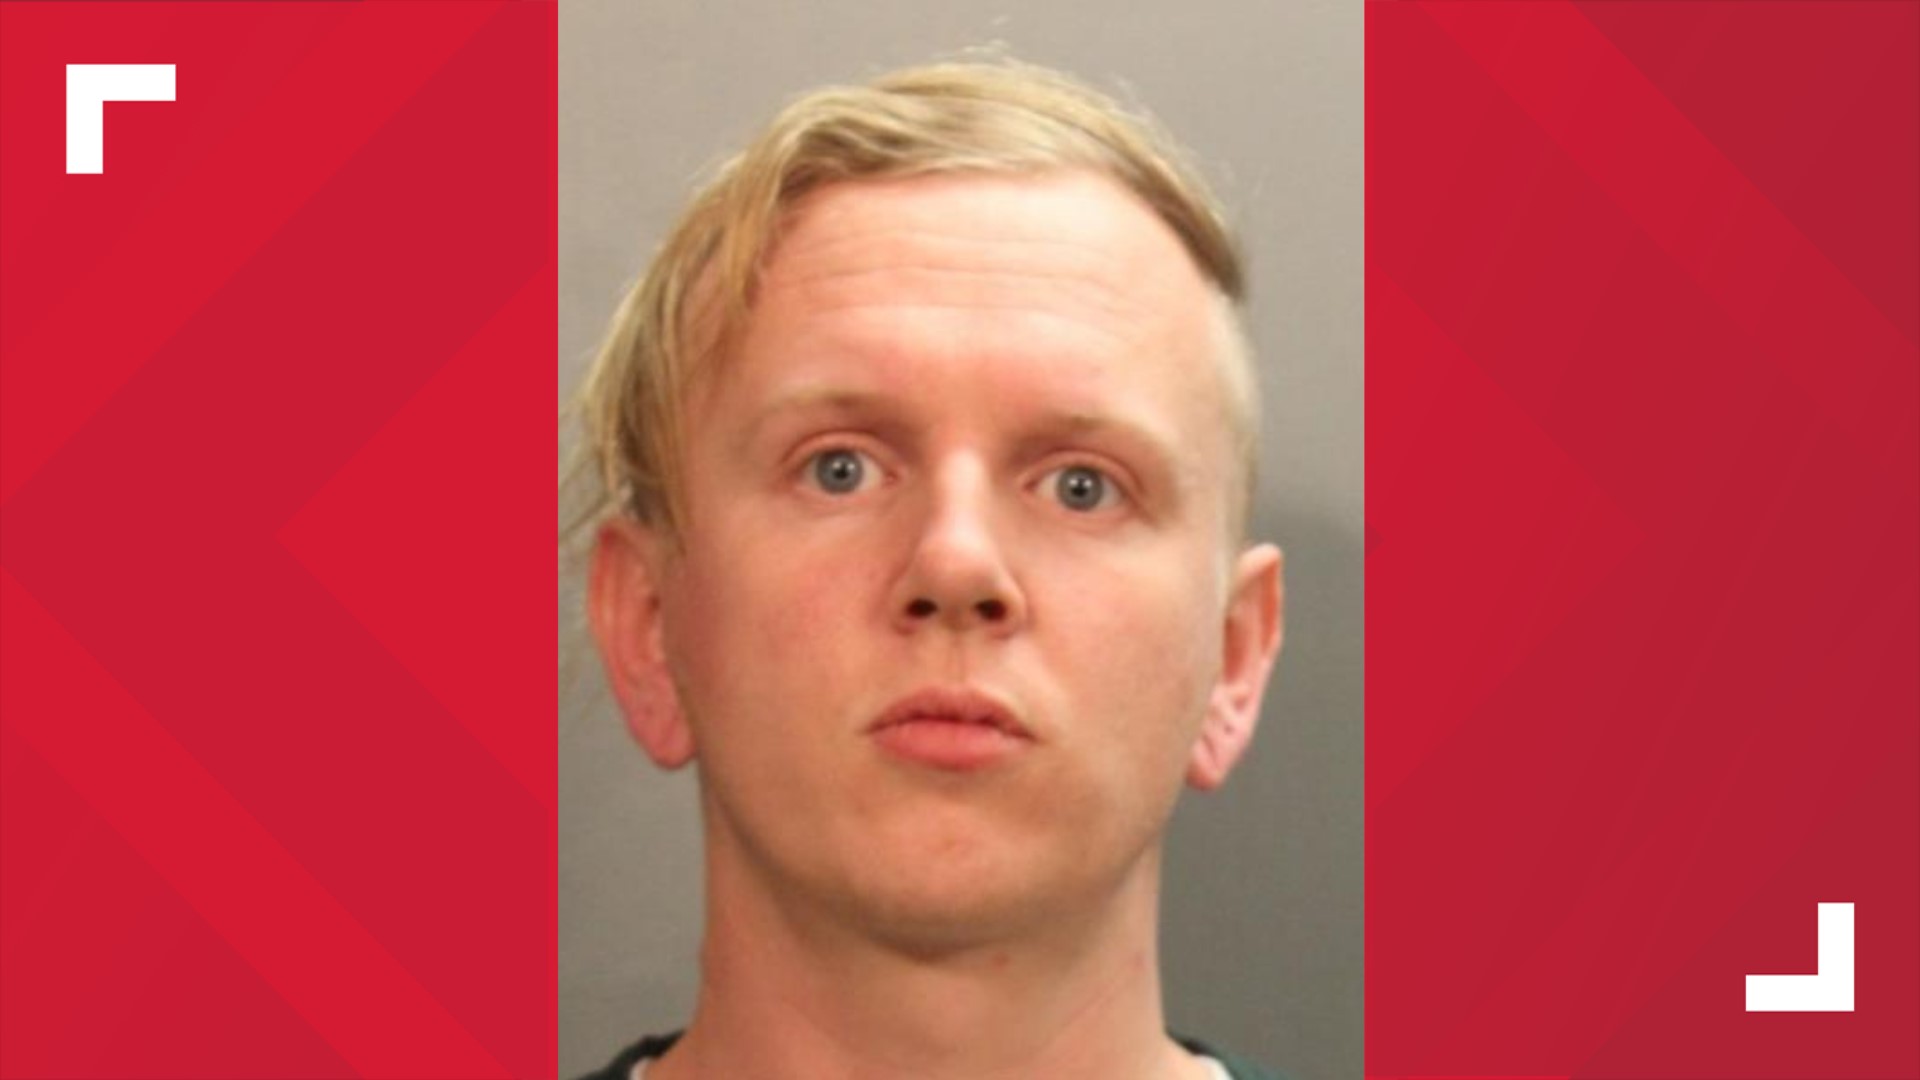 27-year-old Gregory William Loel Timm was arrested Saturday after reportedly driving a van into a Republican tent in a Sandalwood area Walmart parking lot.